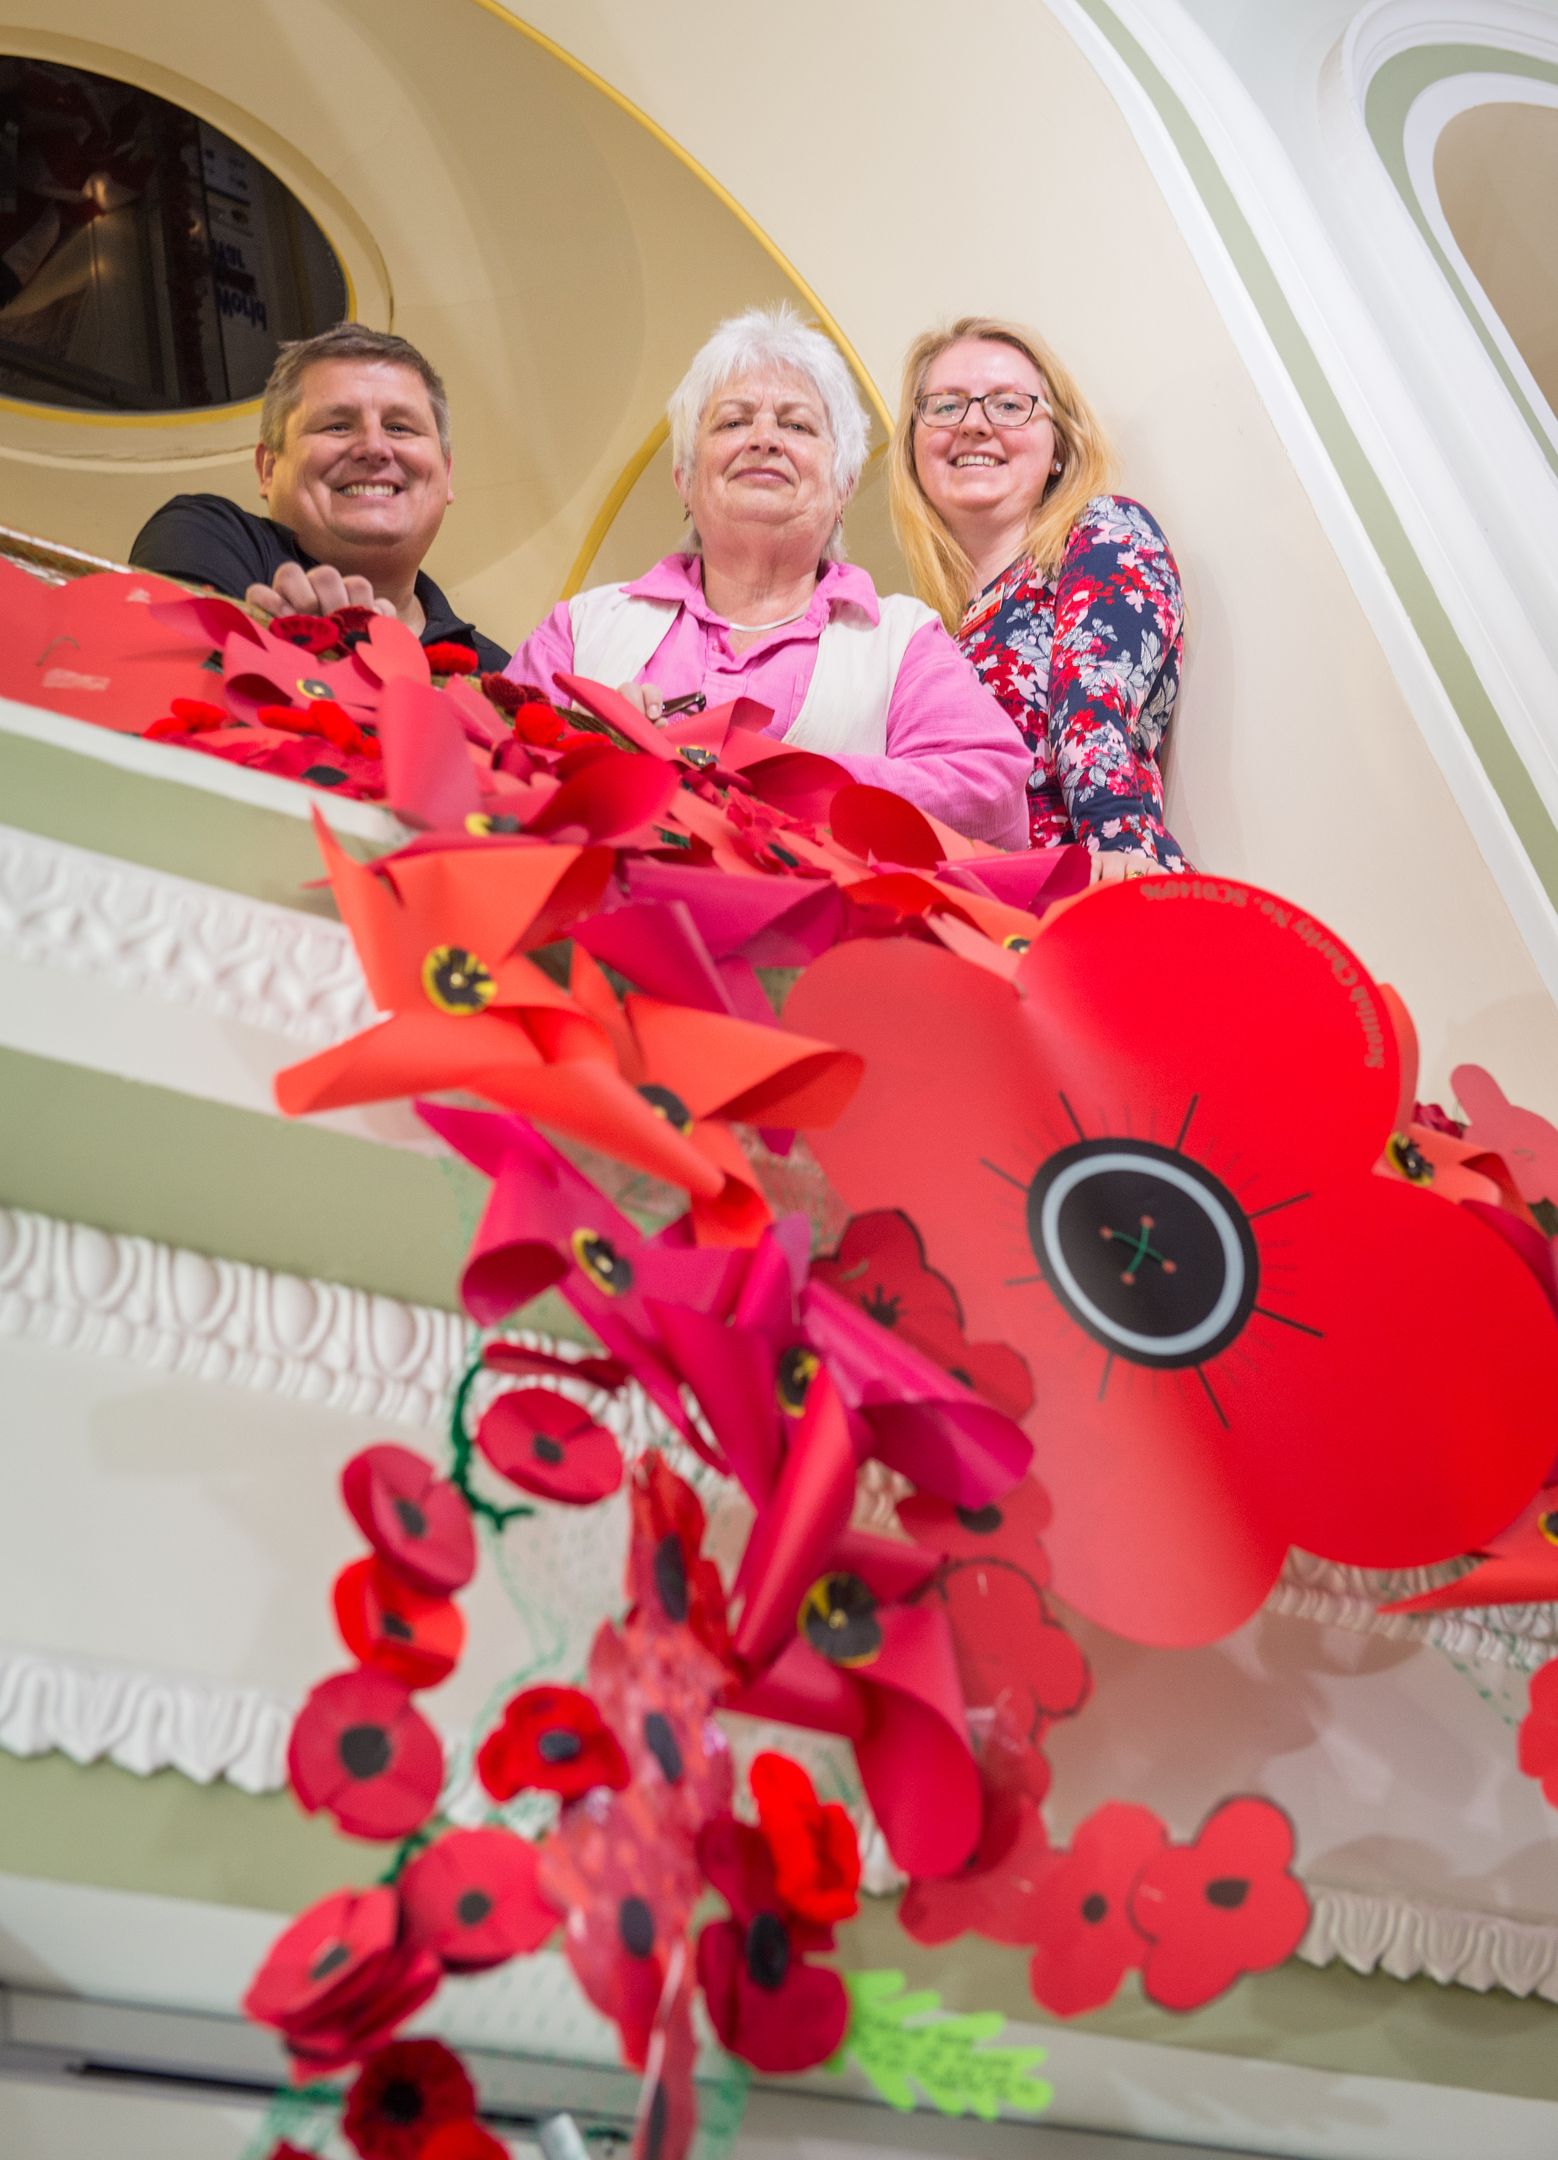 Gordon Michie, head of fundraising at Poppy Scotland, Elgin Museum volunteer Mary Shand and Frances Beveridge, regional fundraiser at Poppy Scotland, with the poppies at Elgin Museum.